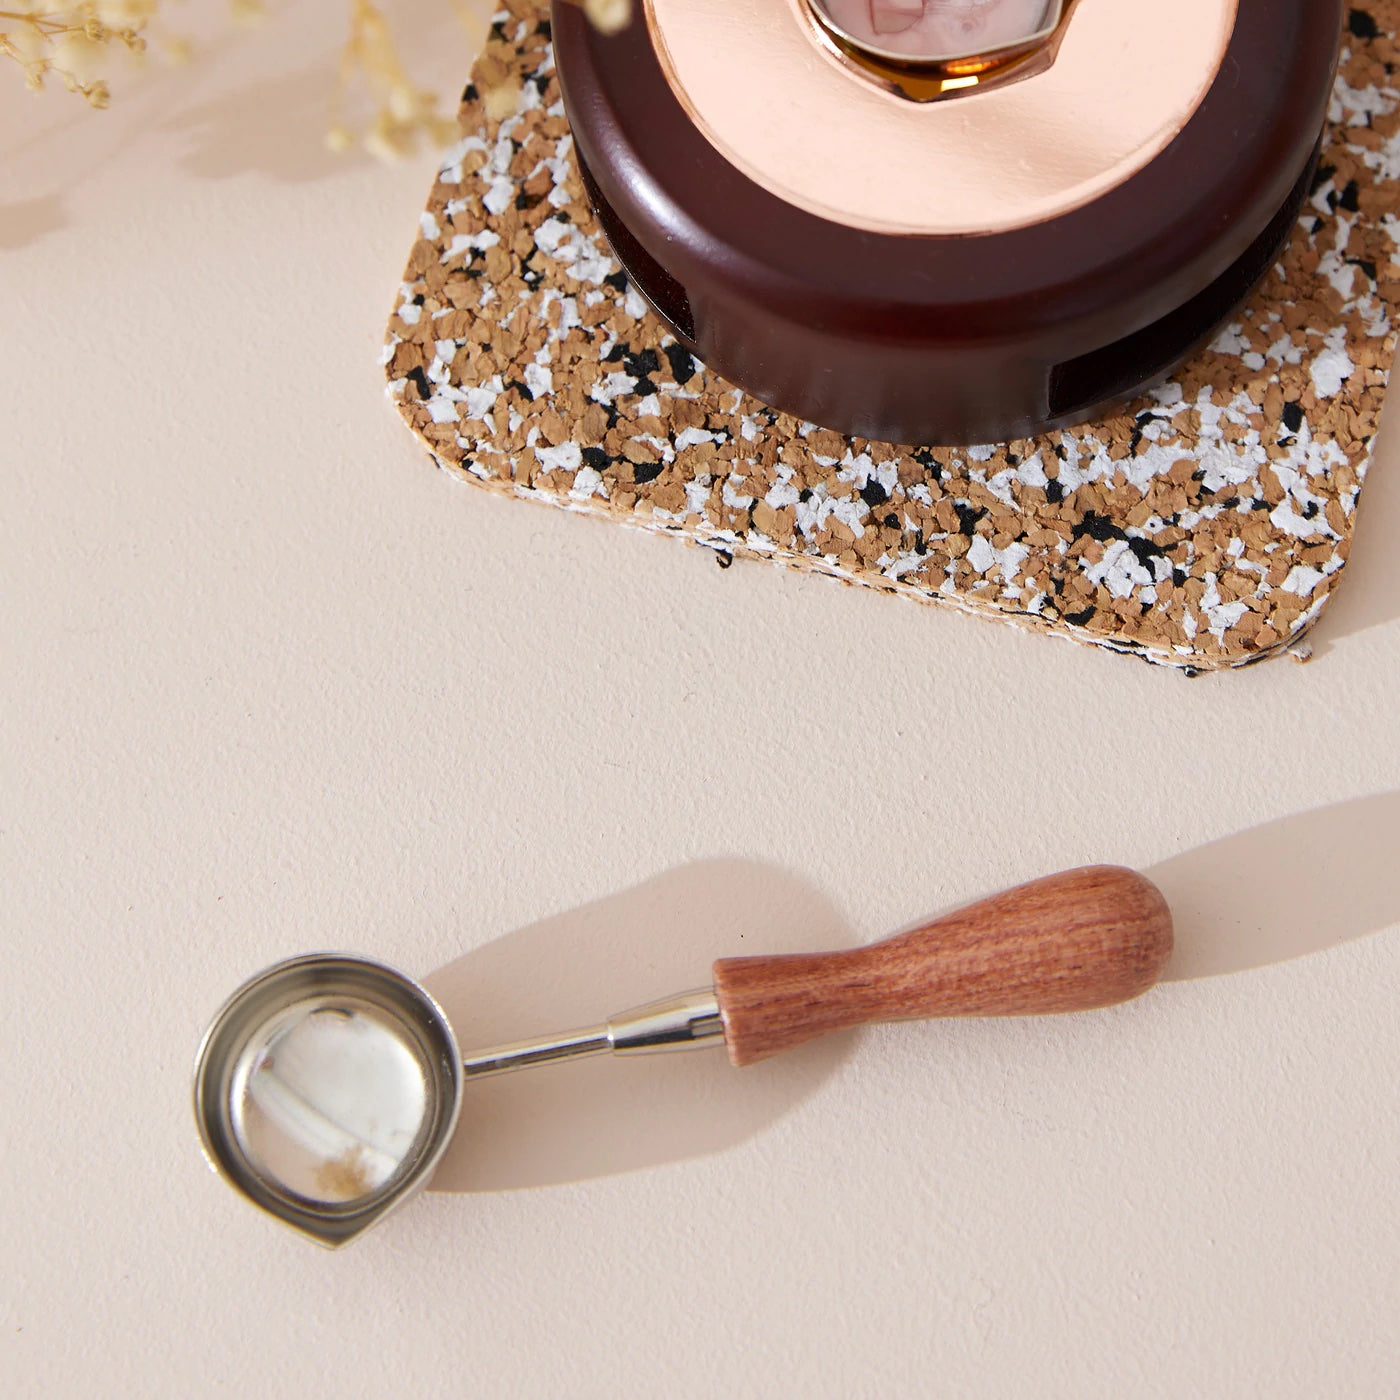 Melting Spoon Wooden Handle